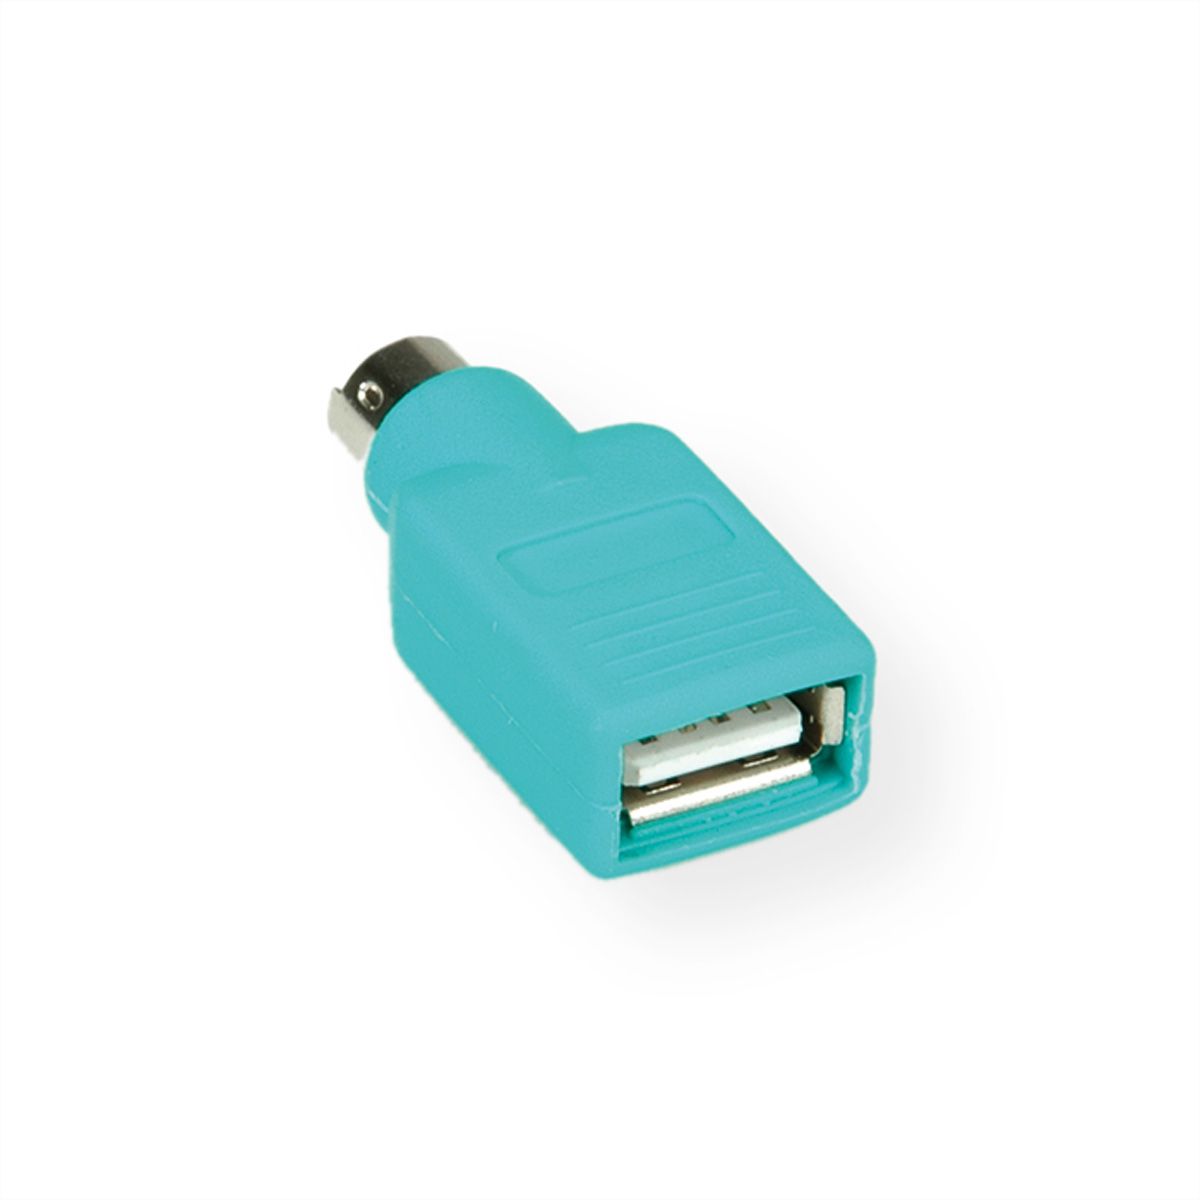 Sea anemone visual Expanding VALUE PS/2 to USB Adapter, Mouse, green - SECOMP International AG